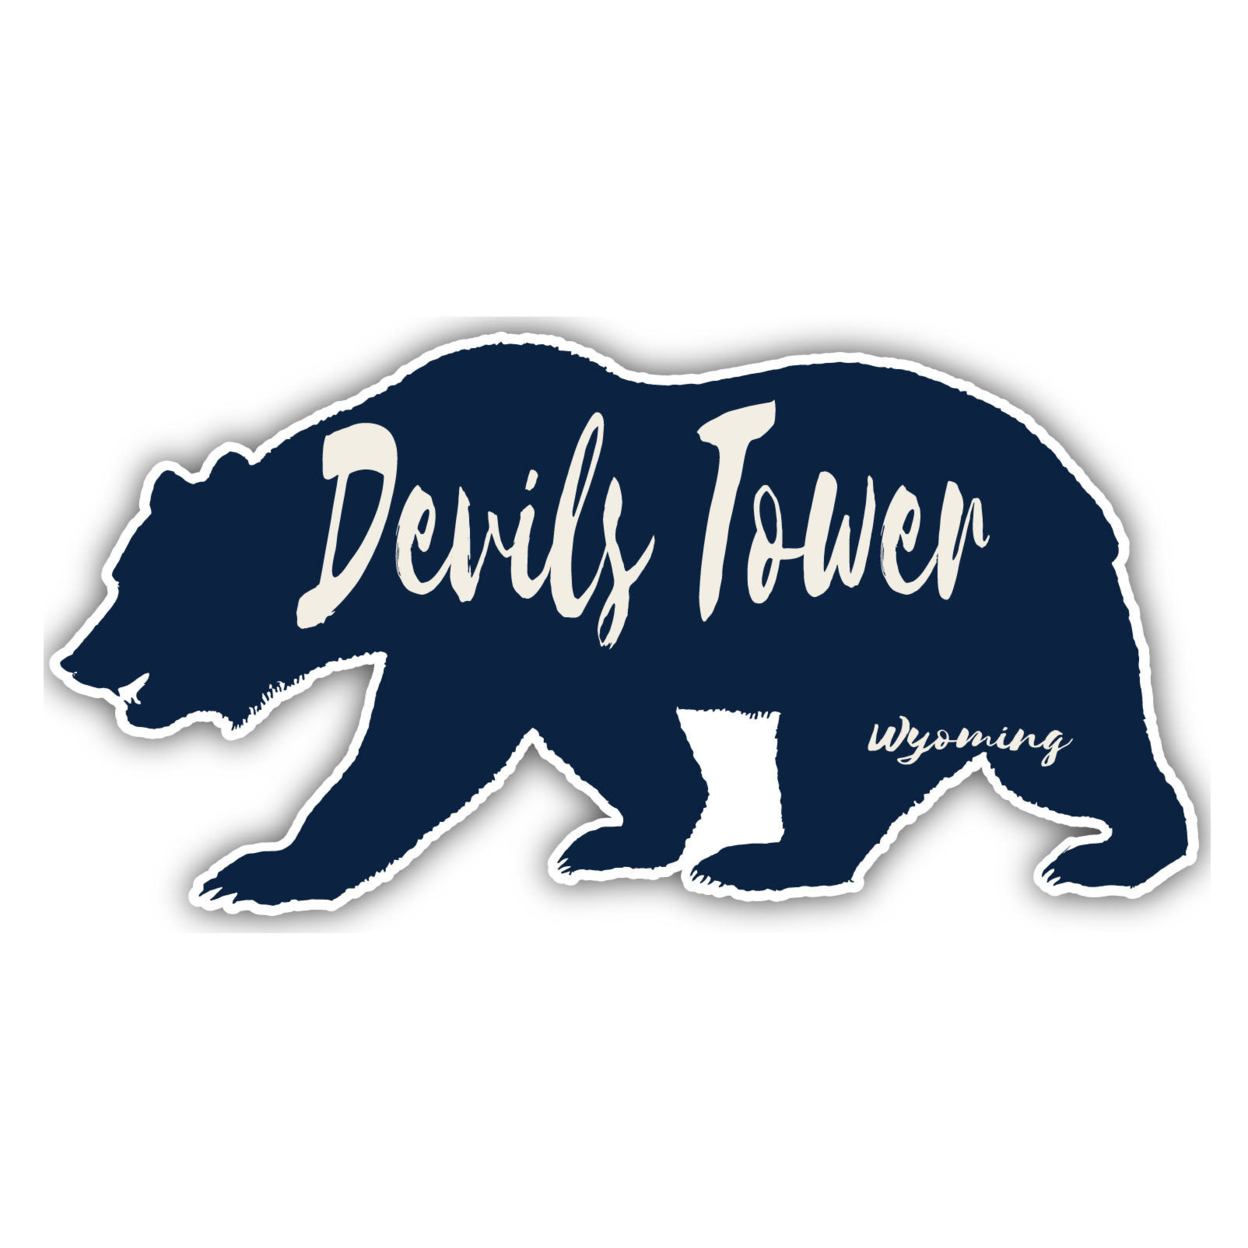 Devils Tower Wyoming Souvenir Decorative Stickers (Choose Theme And Size) - 4-Pack, 8-Inch, Adventures Awaits